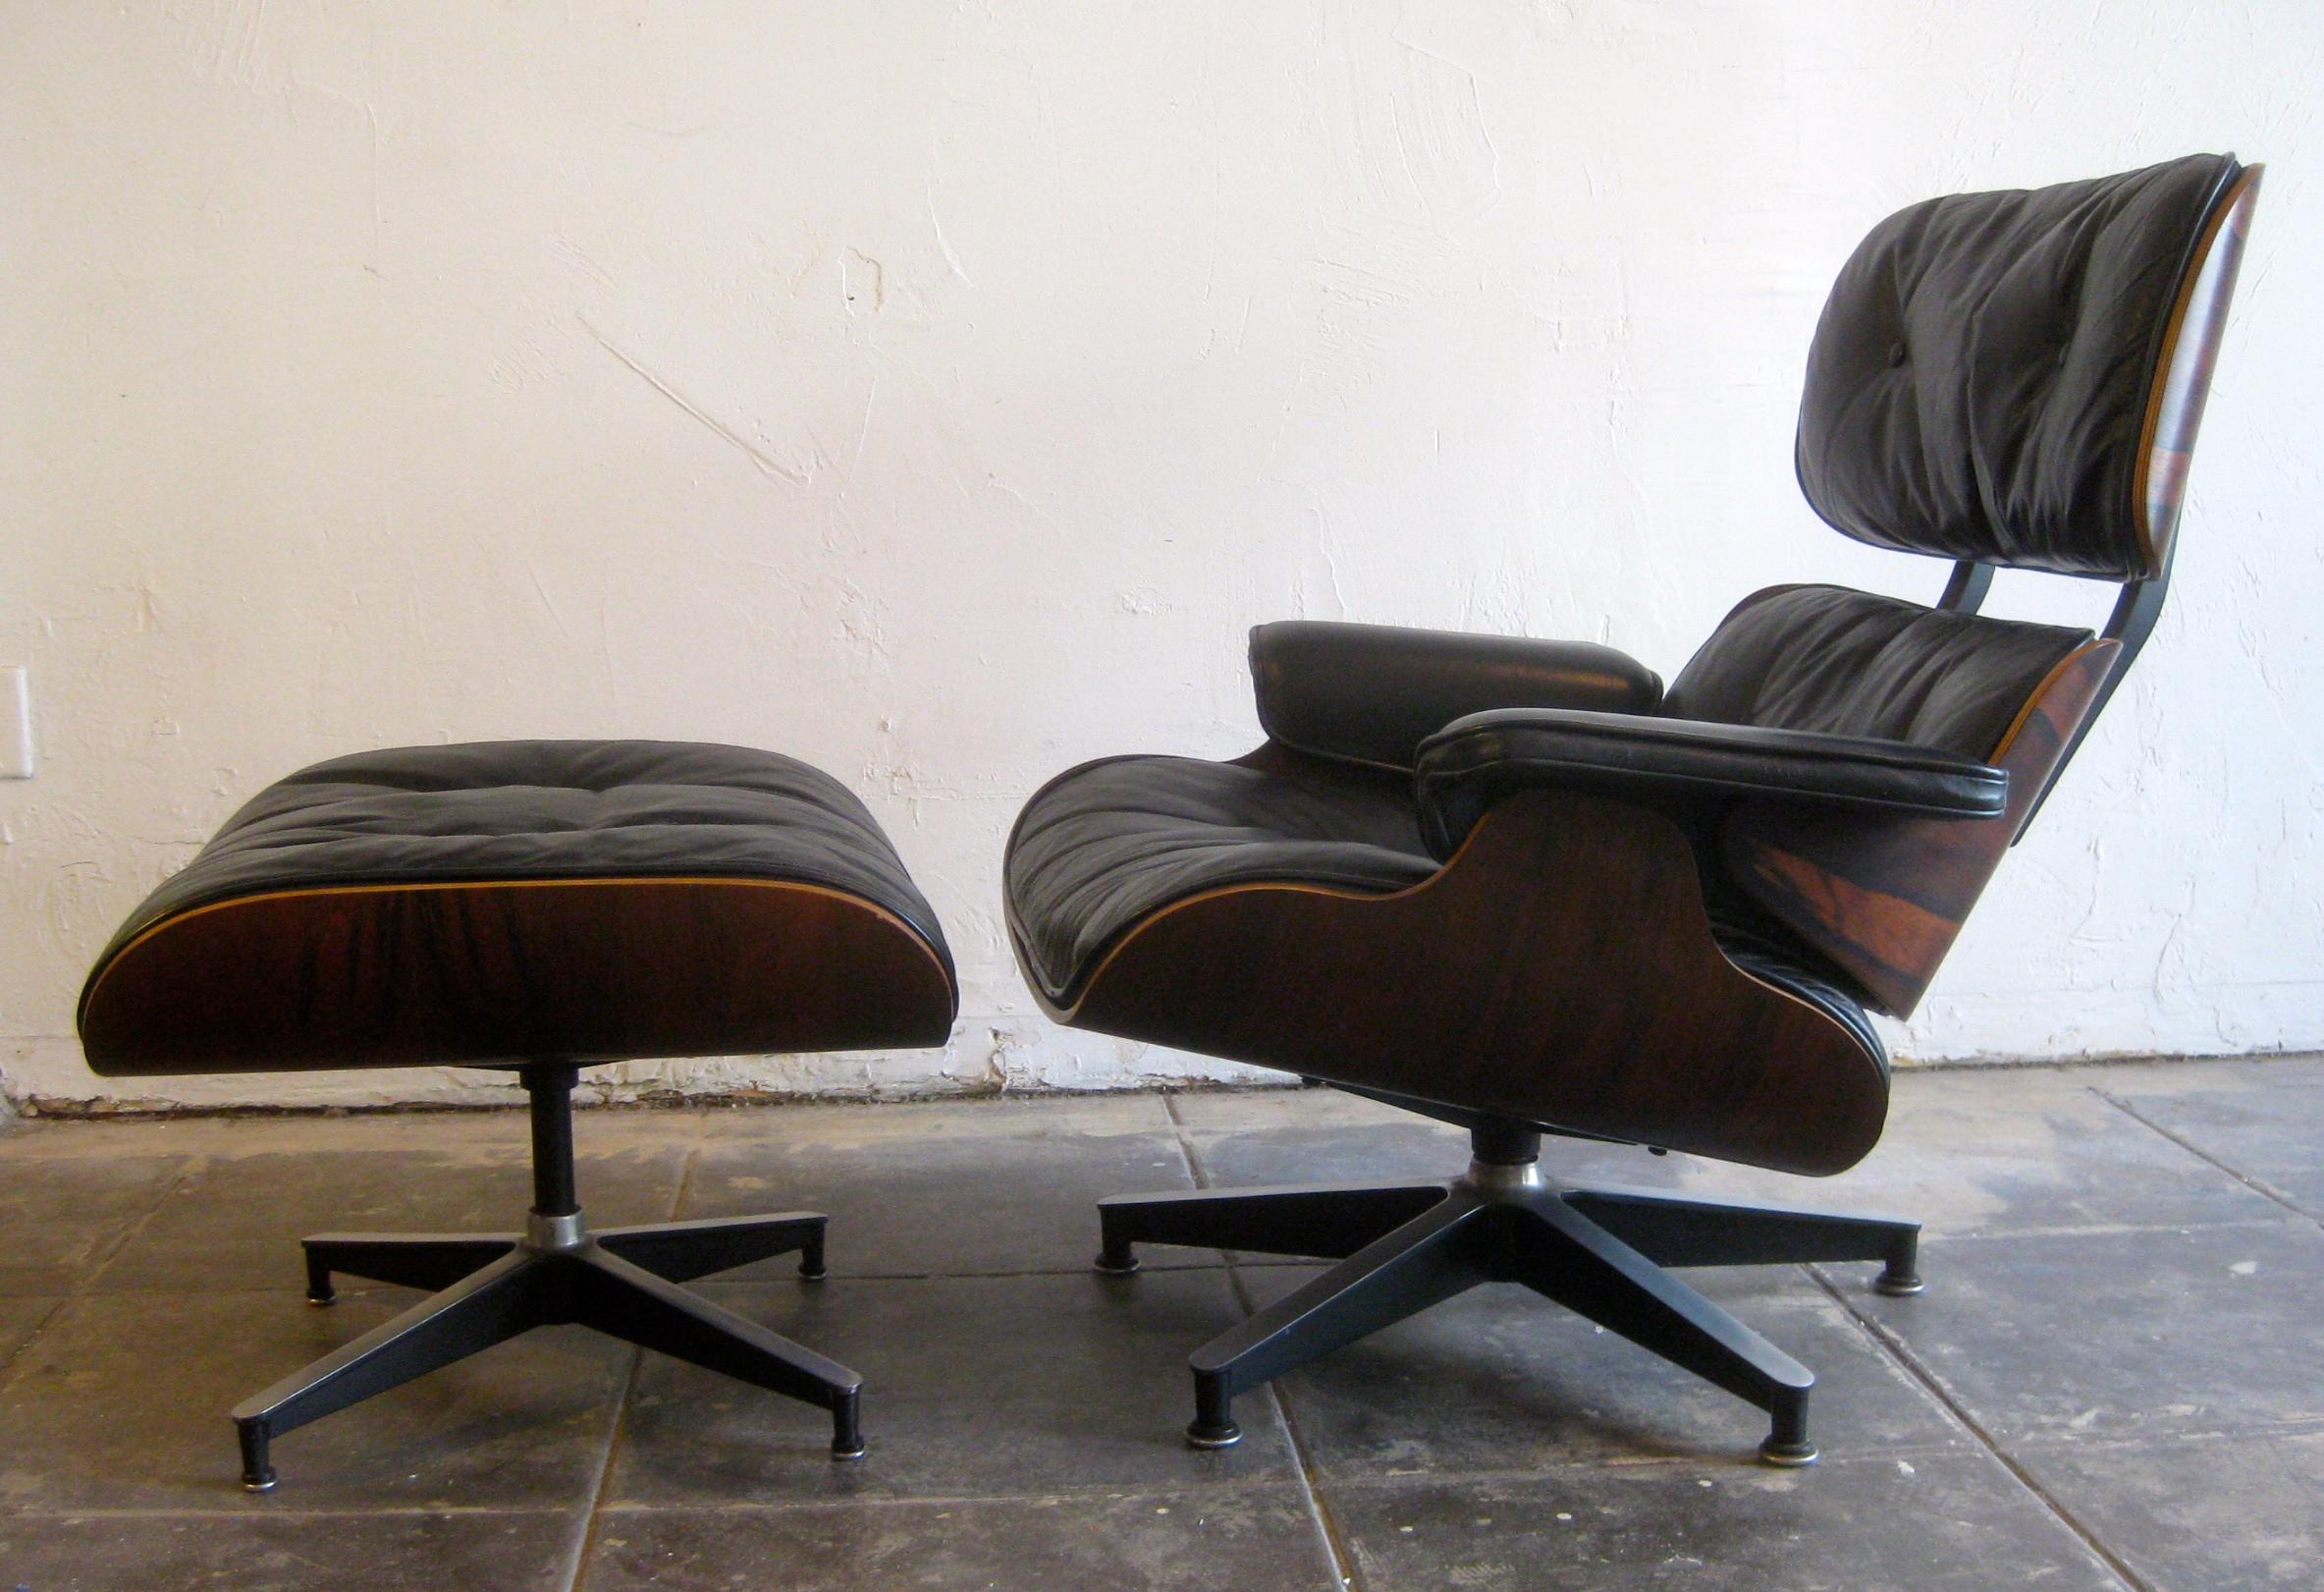 Stunning original 2nd generation Herman Miller 670 rosewood lounge chair and matching 671 ottoman designed by Charles Eames. This chair dates from the early 1960s and is 100% original. Features black leather down cushions. The rosewood shells are